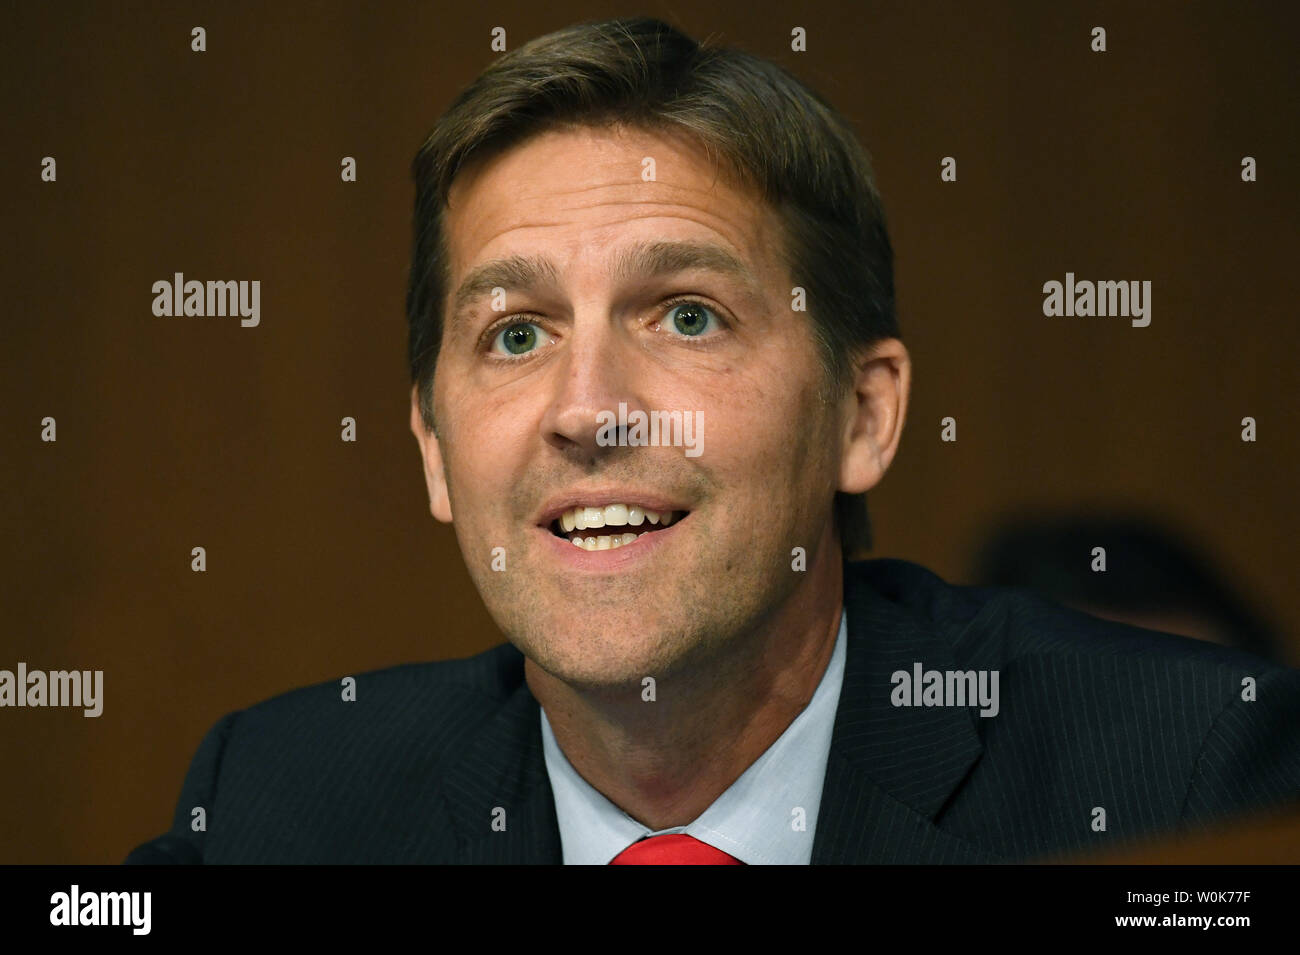 Sen. Ben Sasse, R-Neb., delivers his opening statement during the Judiciary Committee confirmation hearing for Supreme Court Justice nominee Brett M. Kavanaugh on Capitol Hill in Washington, DC on September 4, 2018. Judge Kavanaugh was nominated to fill the seat of Justice Anthony M. Kennedy who announced his retirement in June.  Photo by Pat Benic/UPI Stock Photo